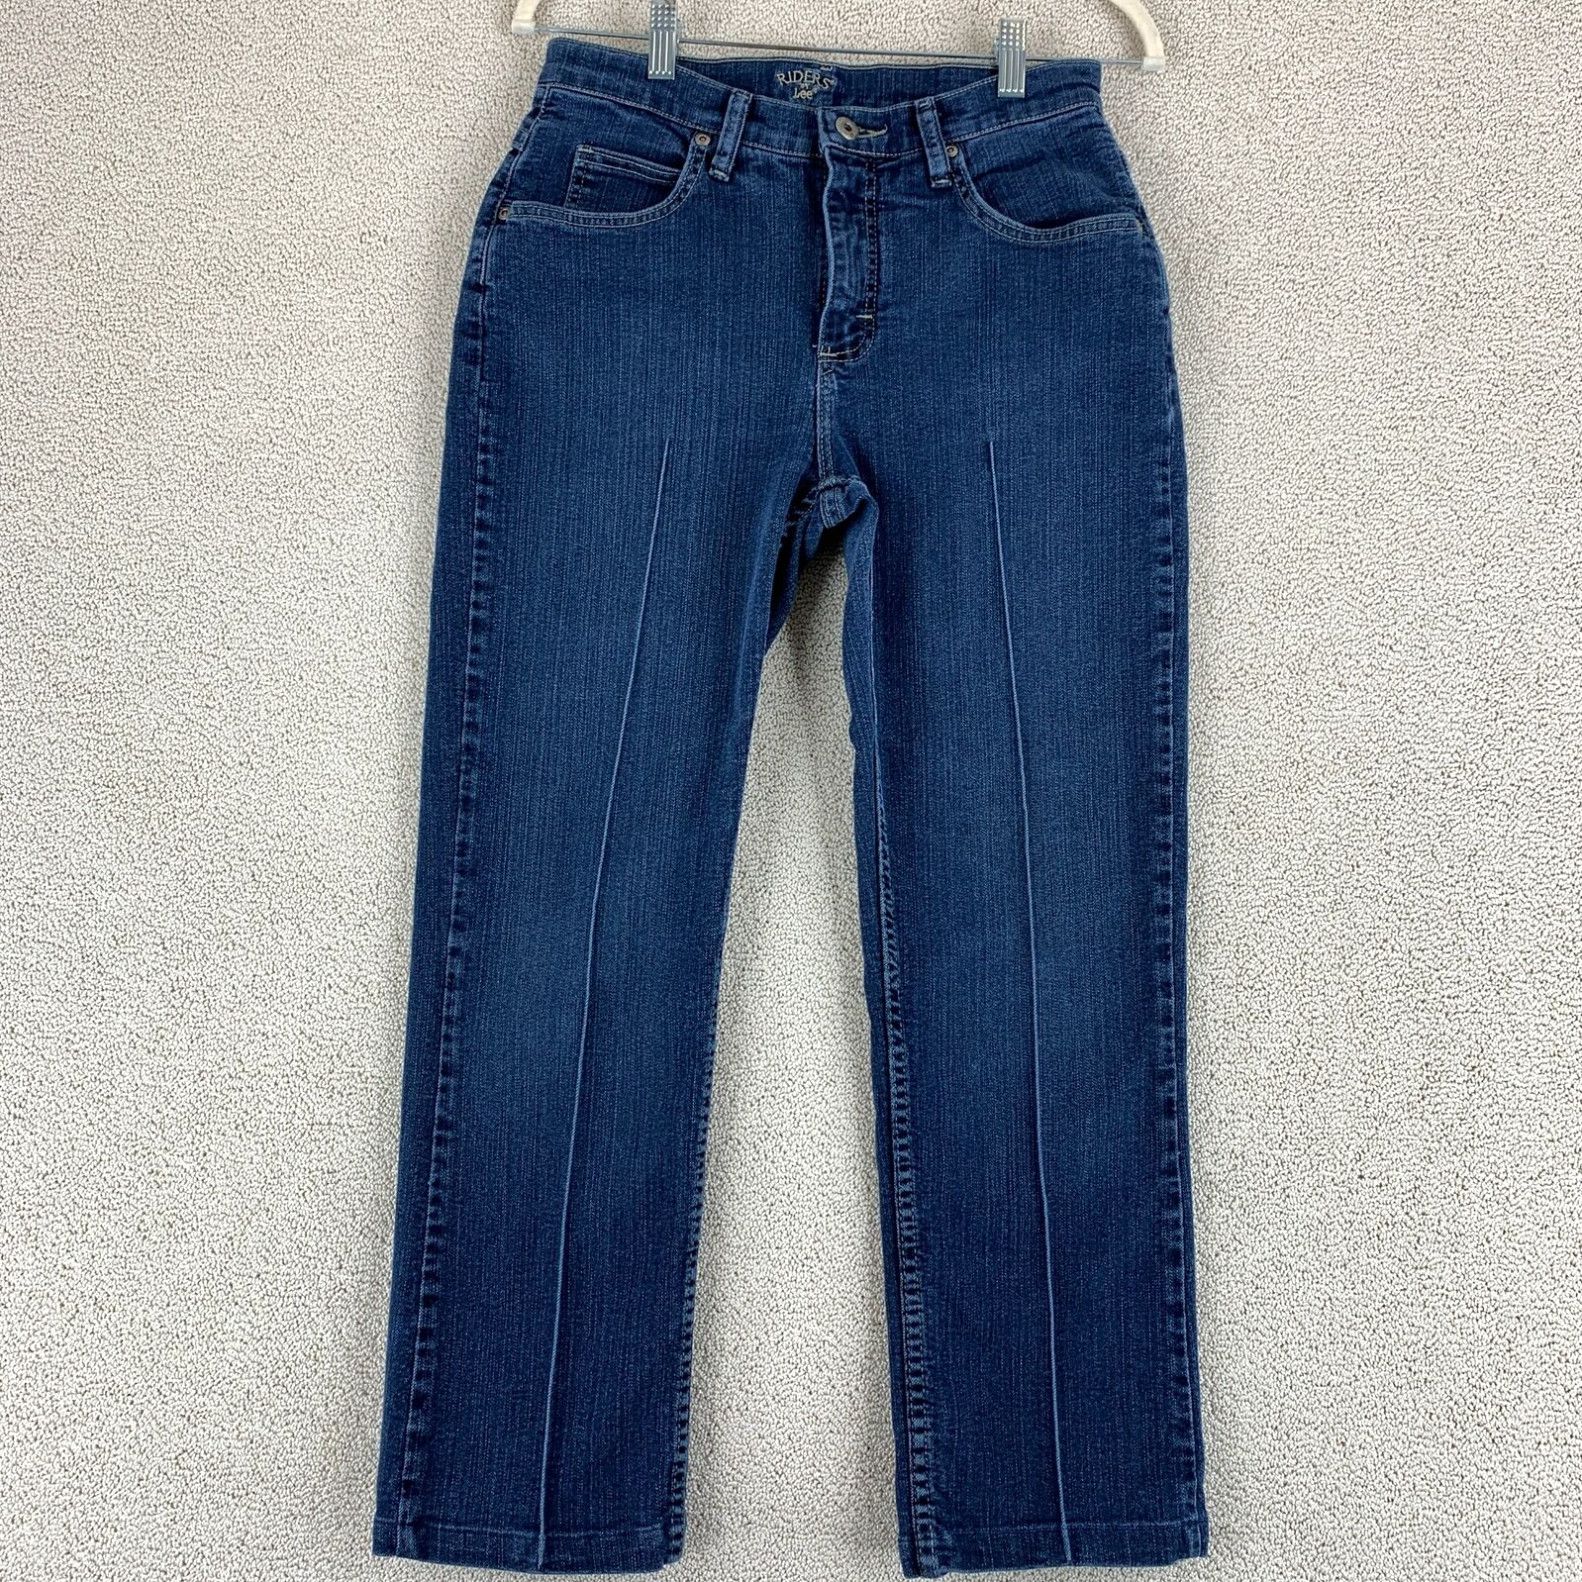 Vintage Riders by Lee Classic Straight Jeans Women's 10 Petite Blue 5-Pocket Mid Rise Size ONE SIZE - 1 Preview